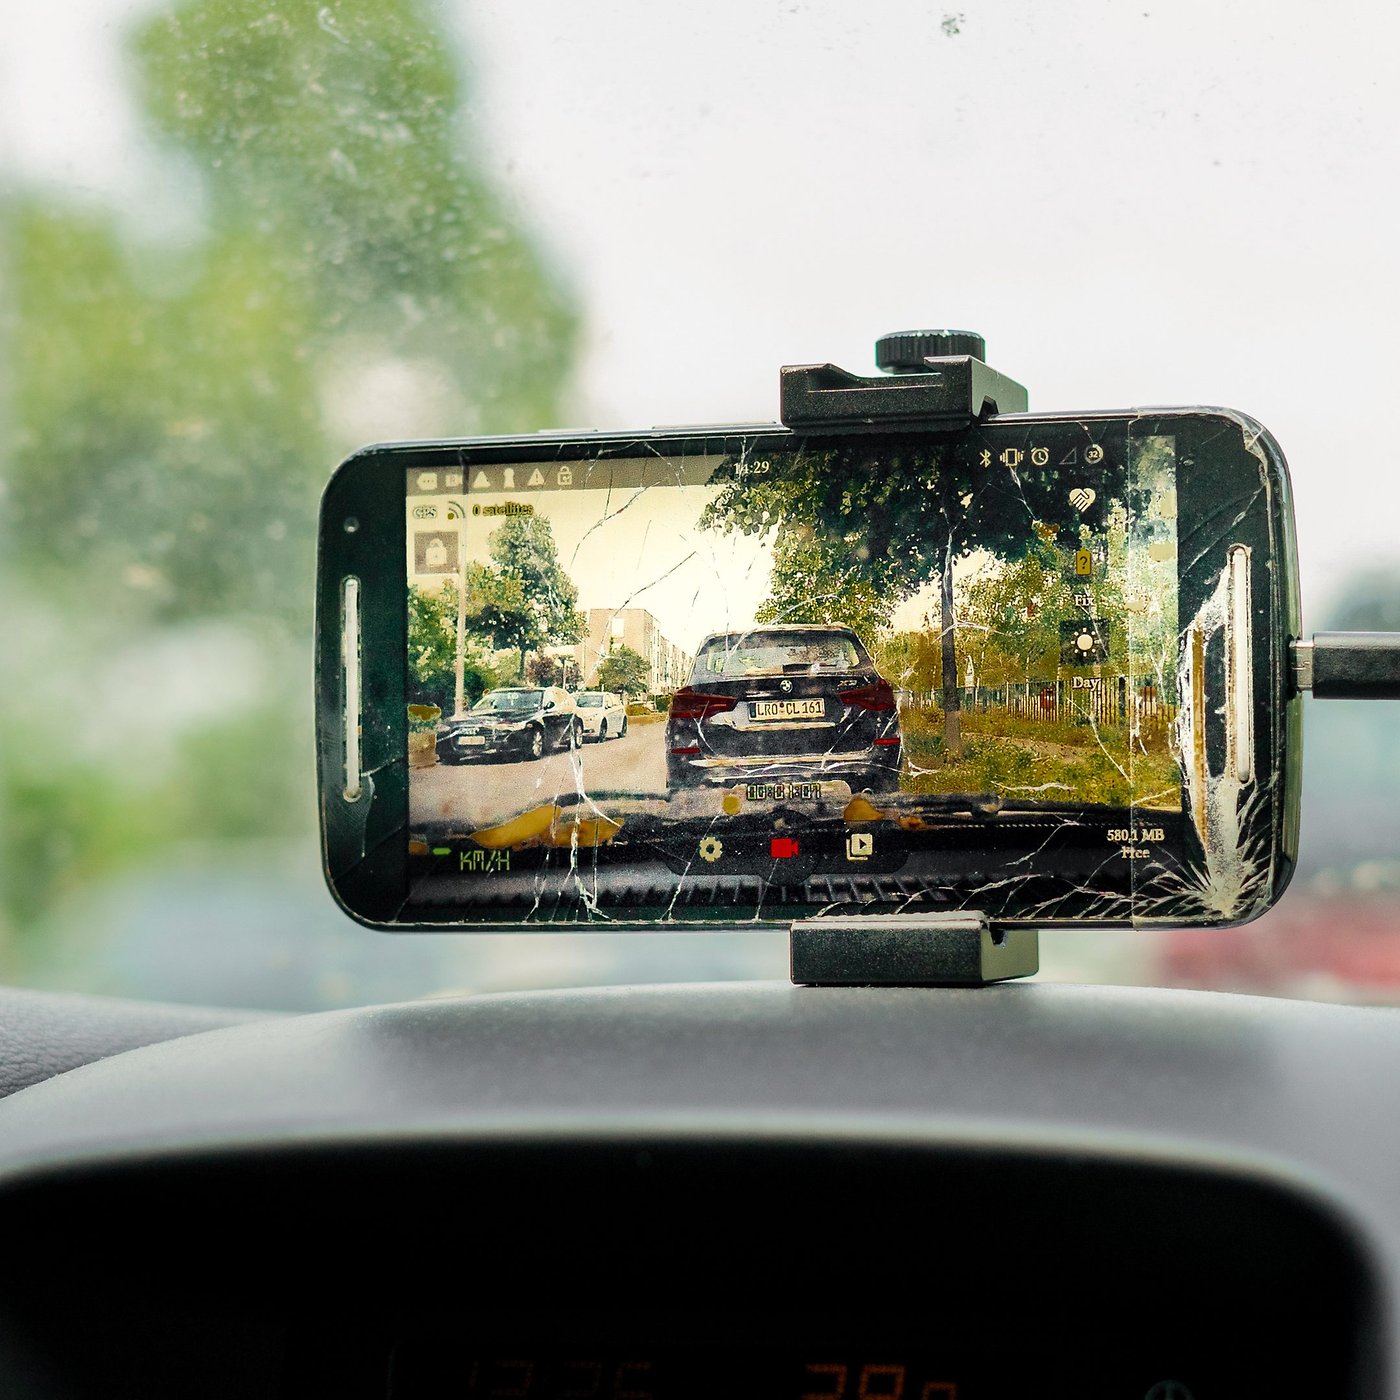 Use your old smartphone as a dash cam – legally and safely | NextPit